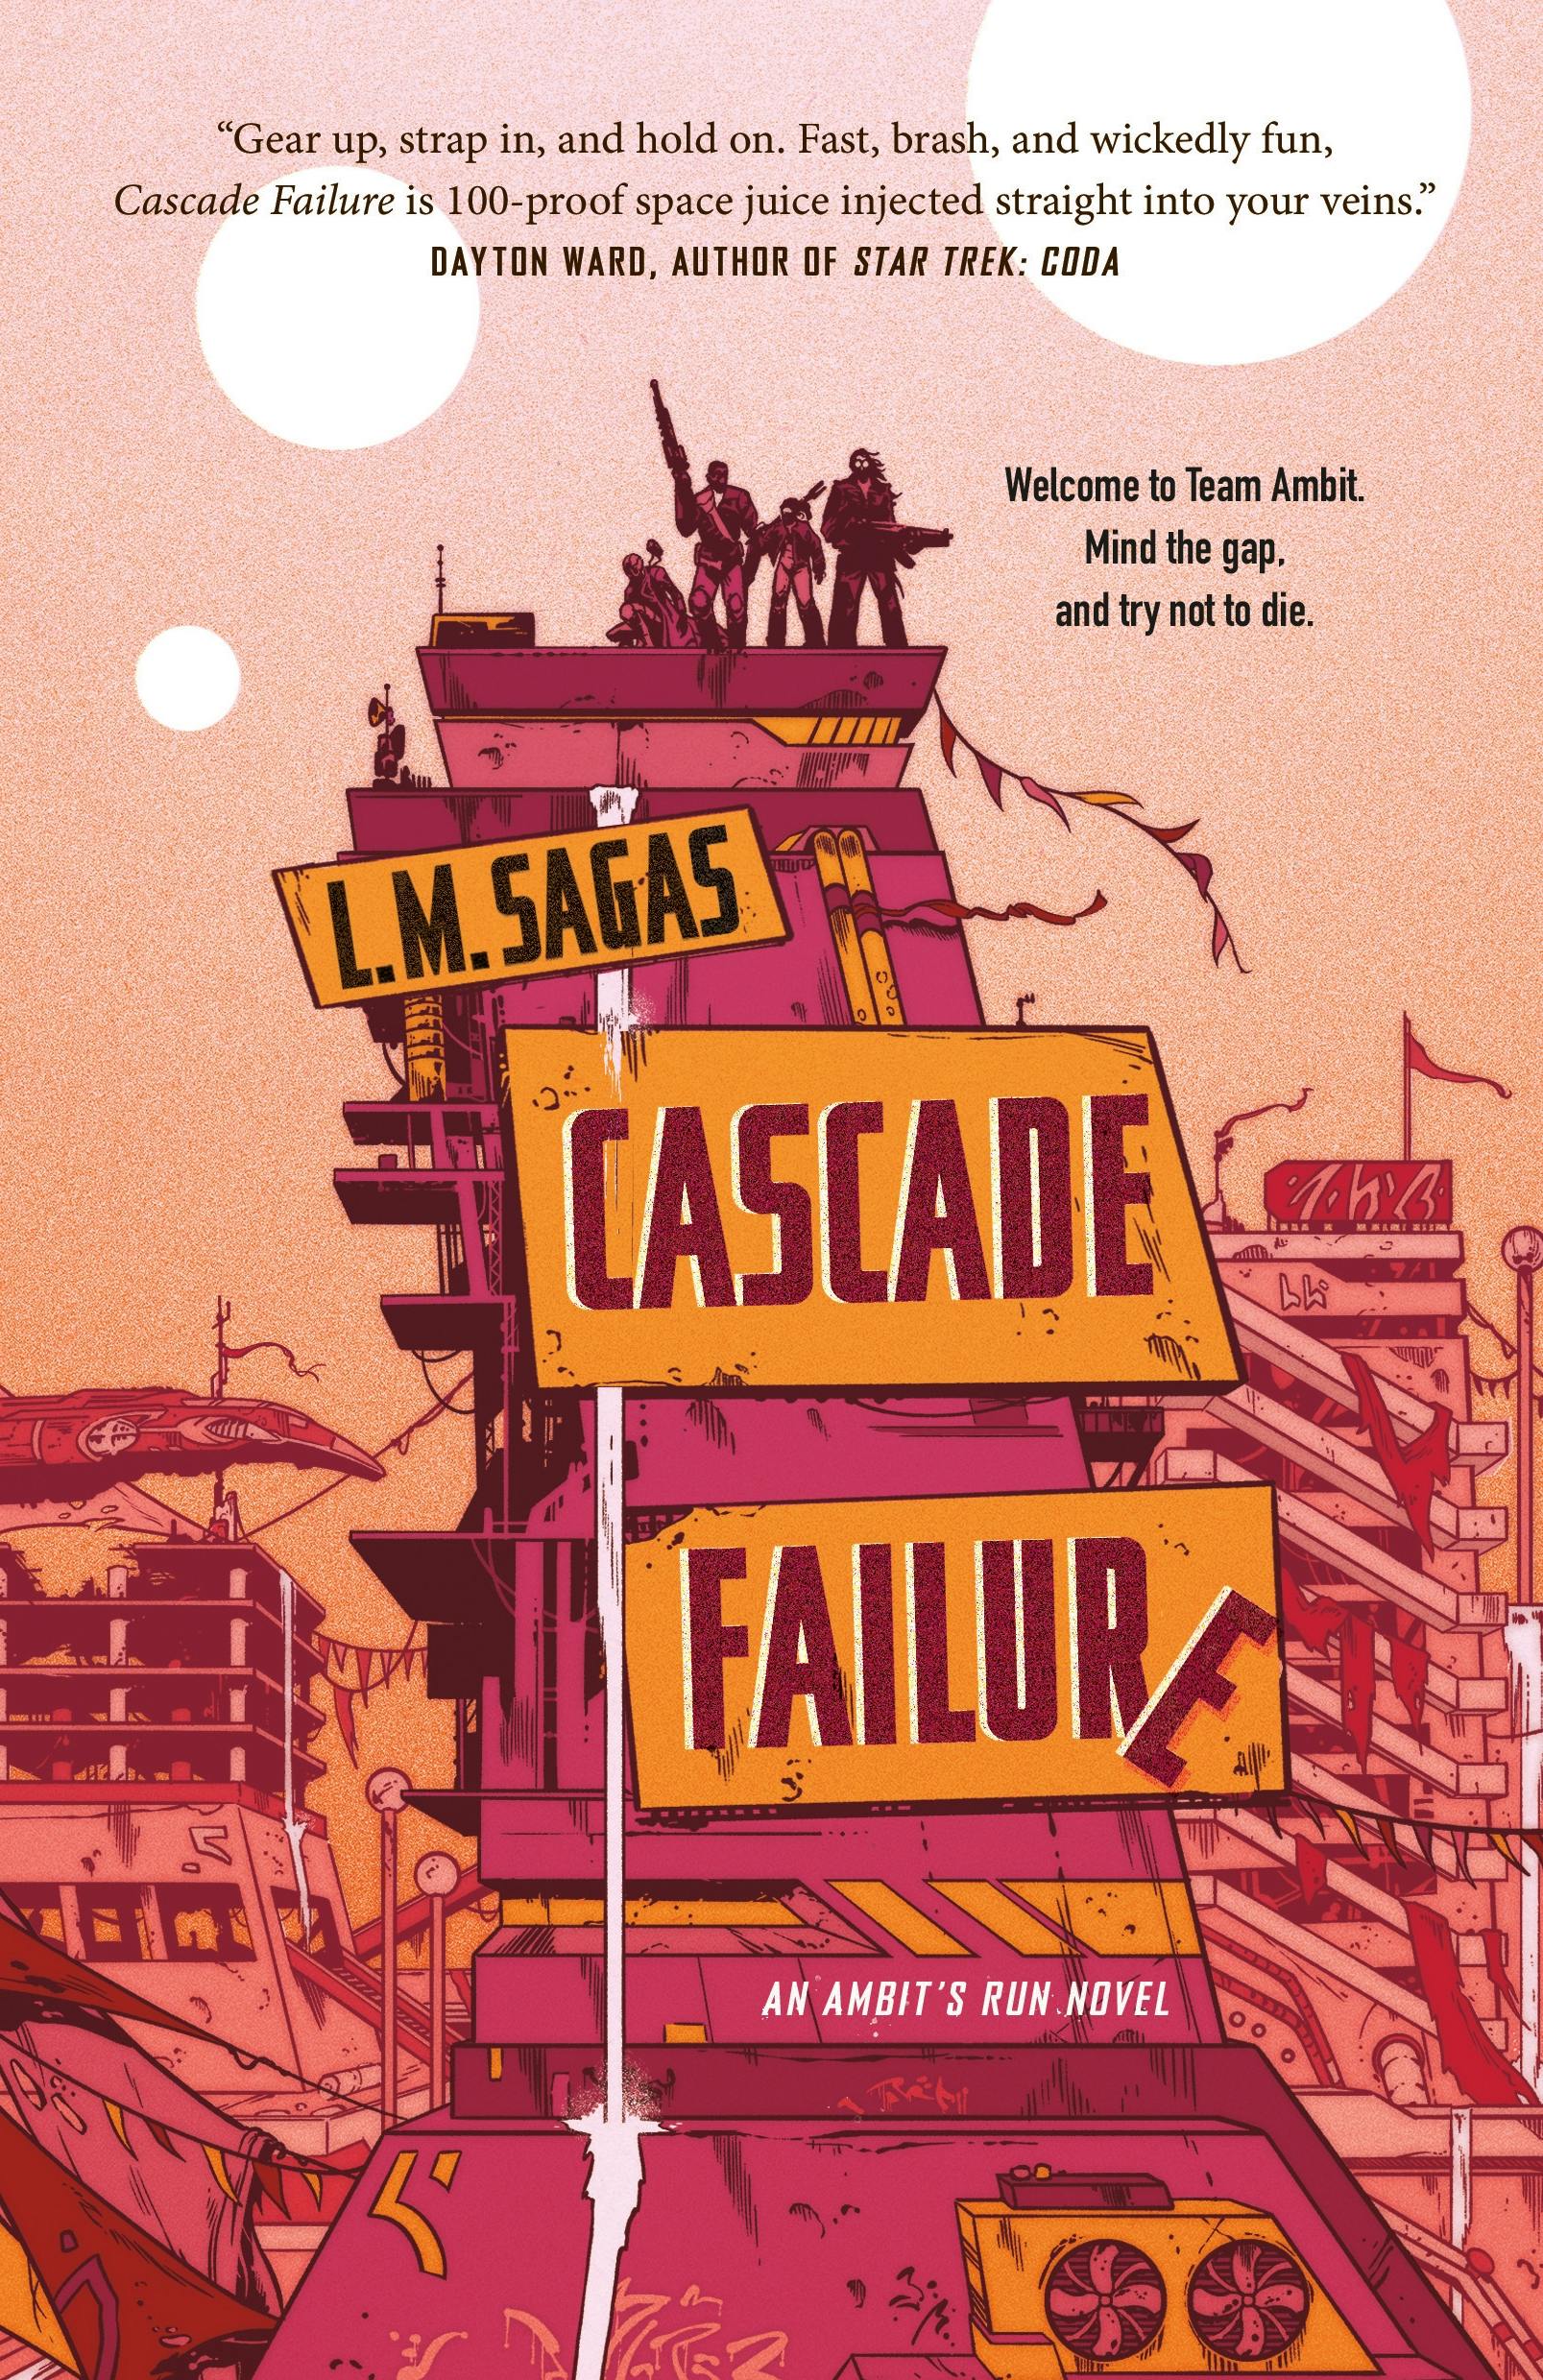 Cover for the book titled as: Cascade Failure